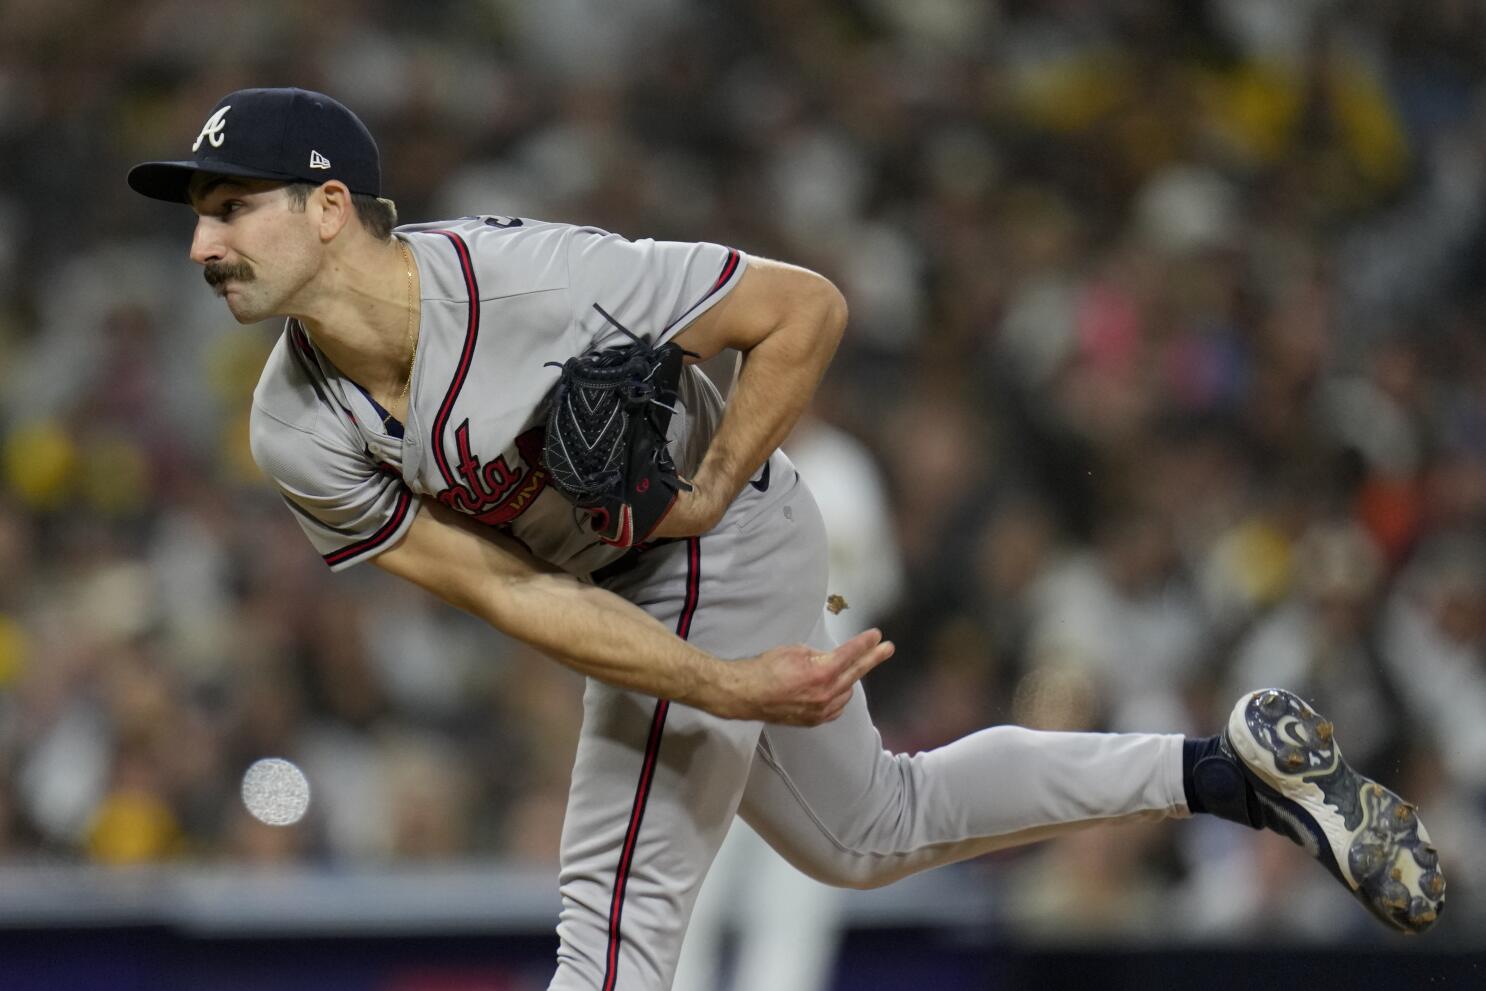 Charlie Morton injury update: Braves pitcher lands on IL with